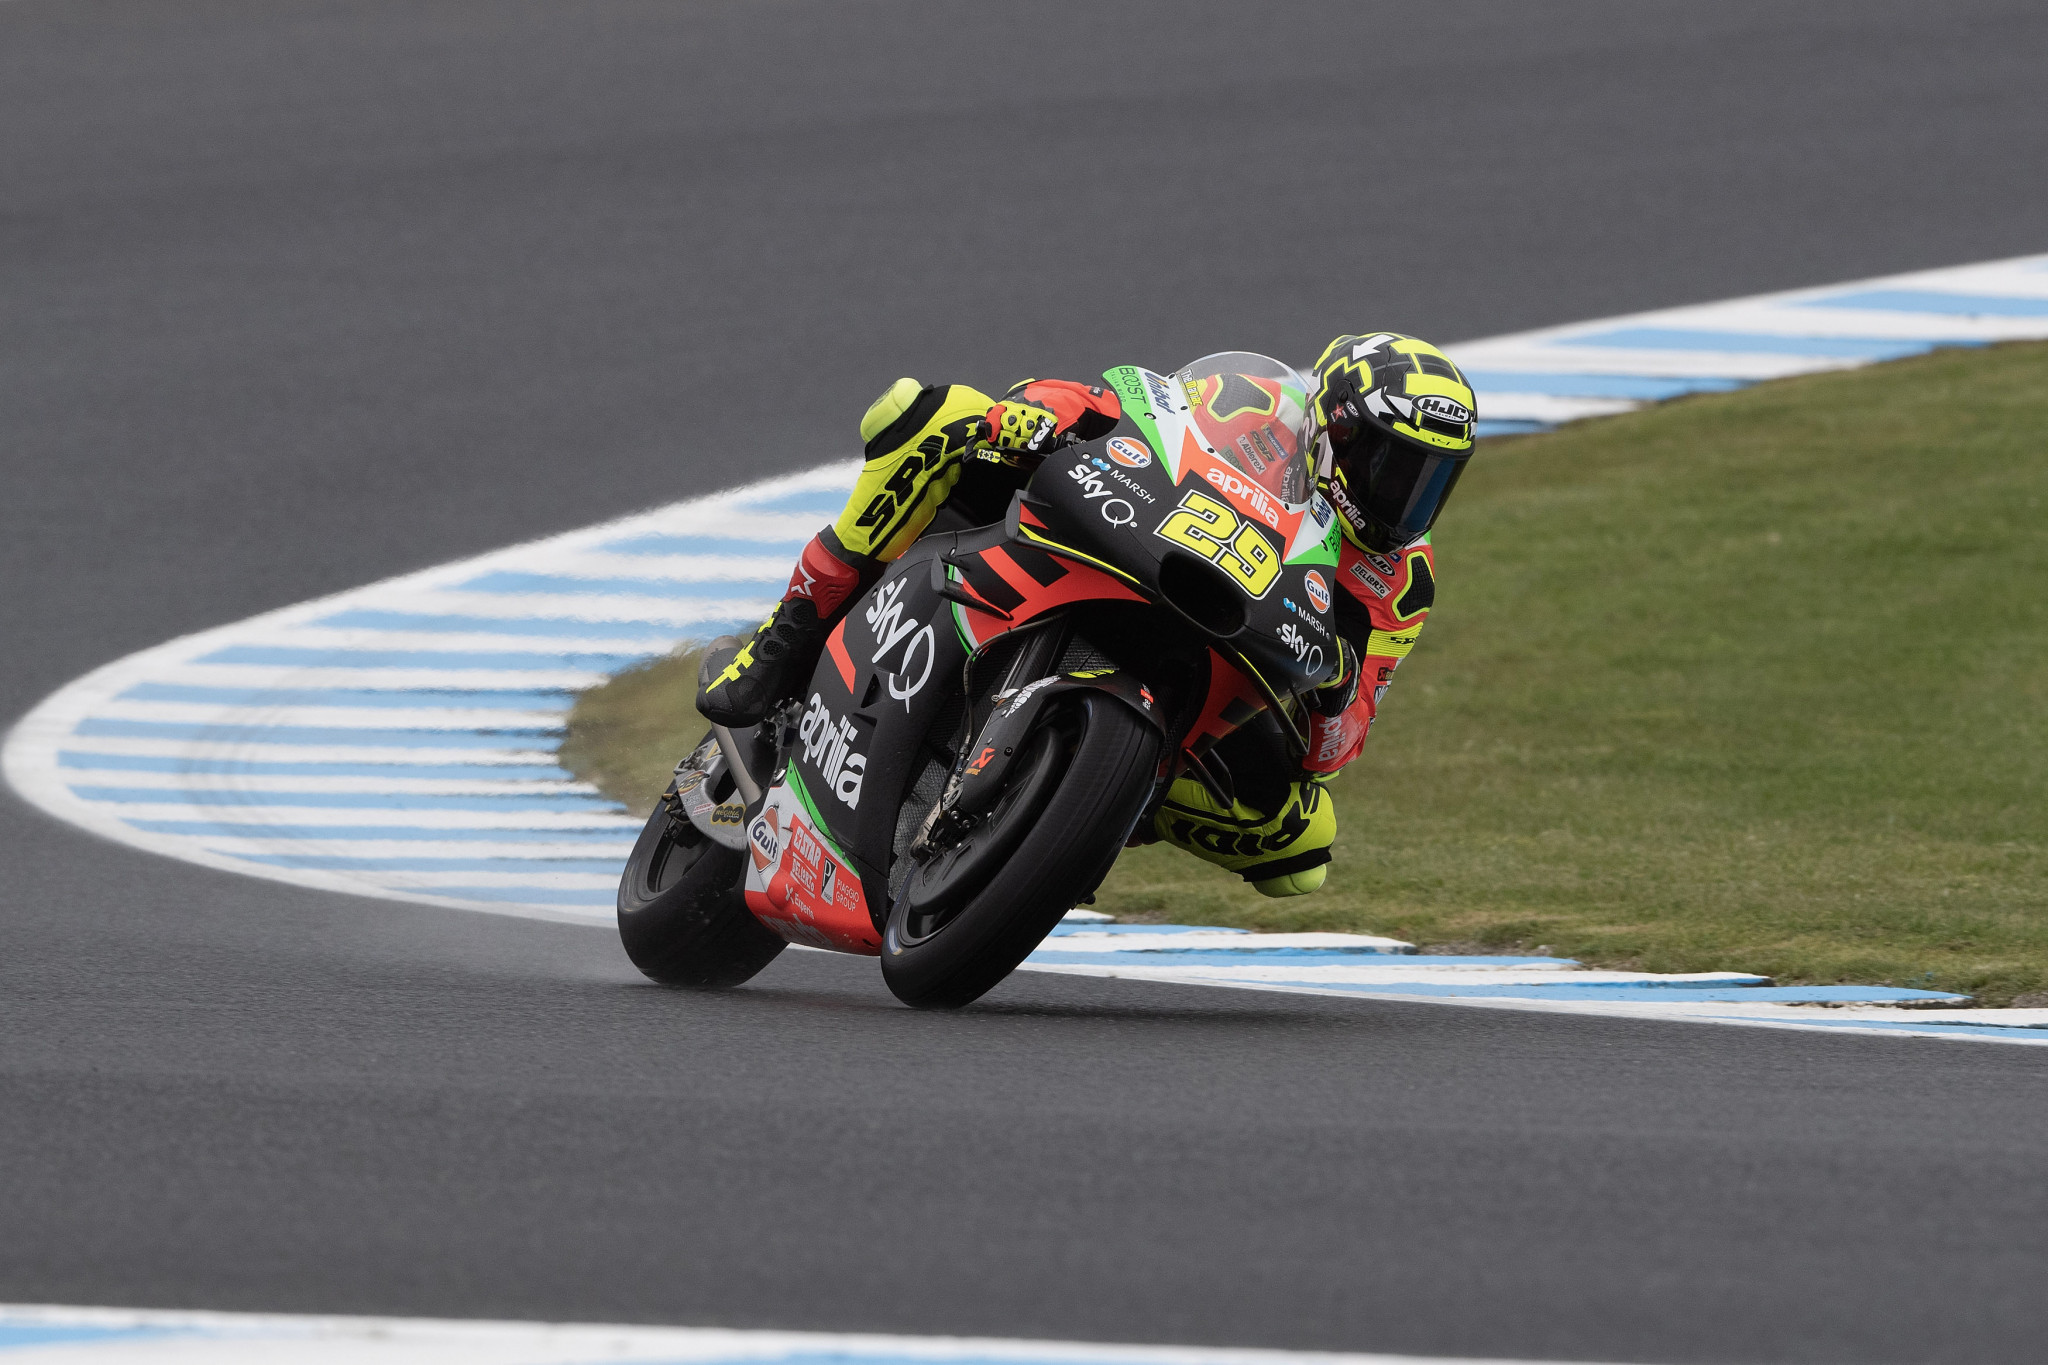 Andrea Iannone is seeking to have his ban overturned ©Getty Images